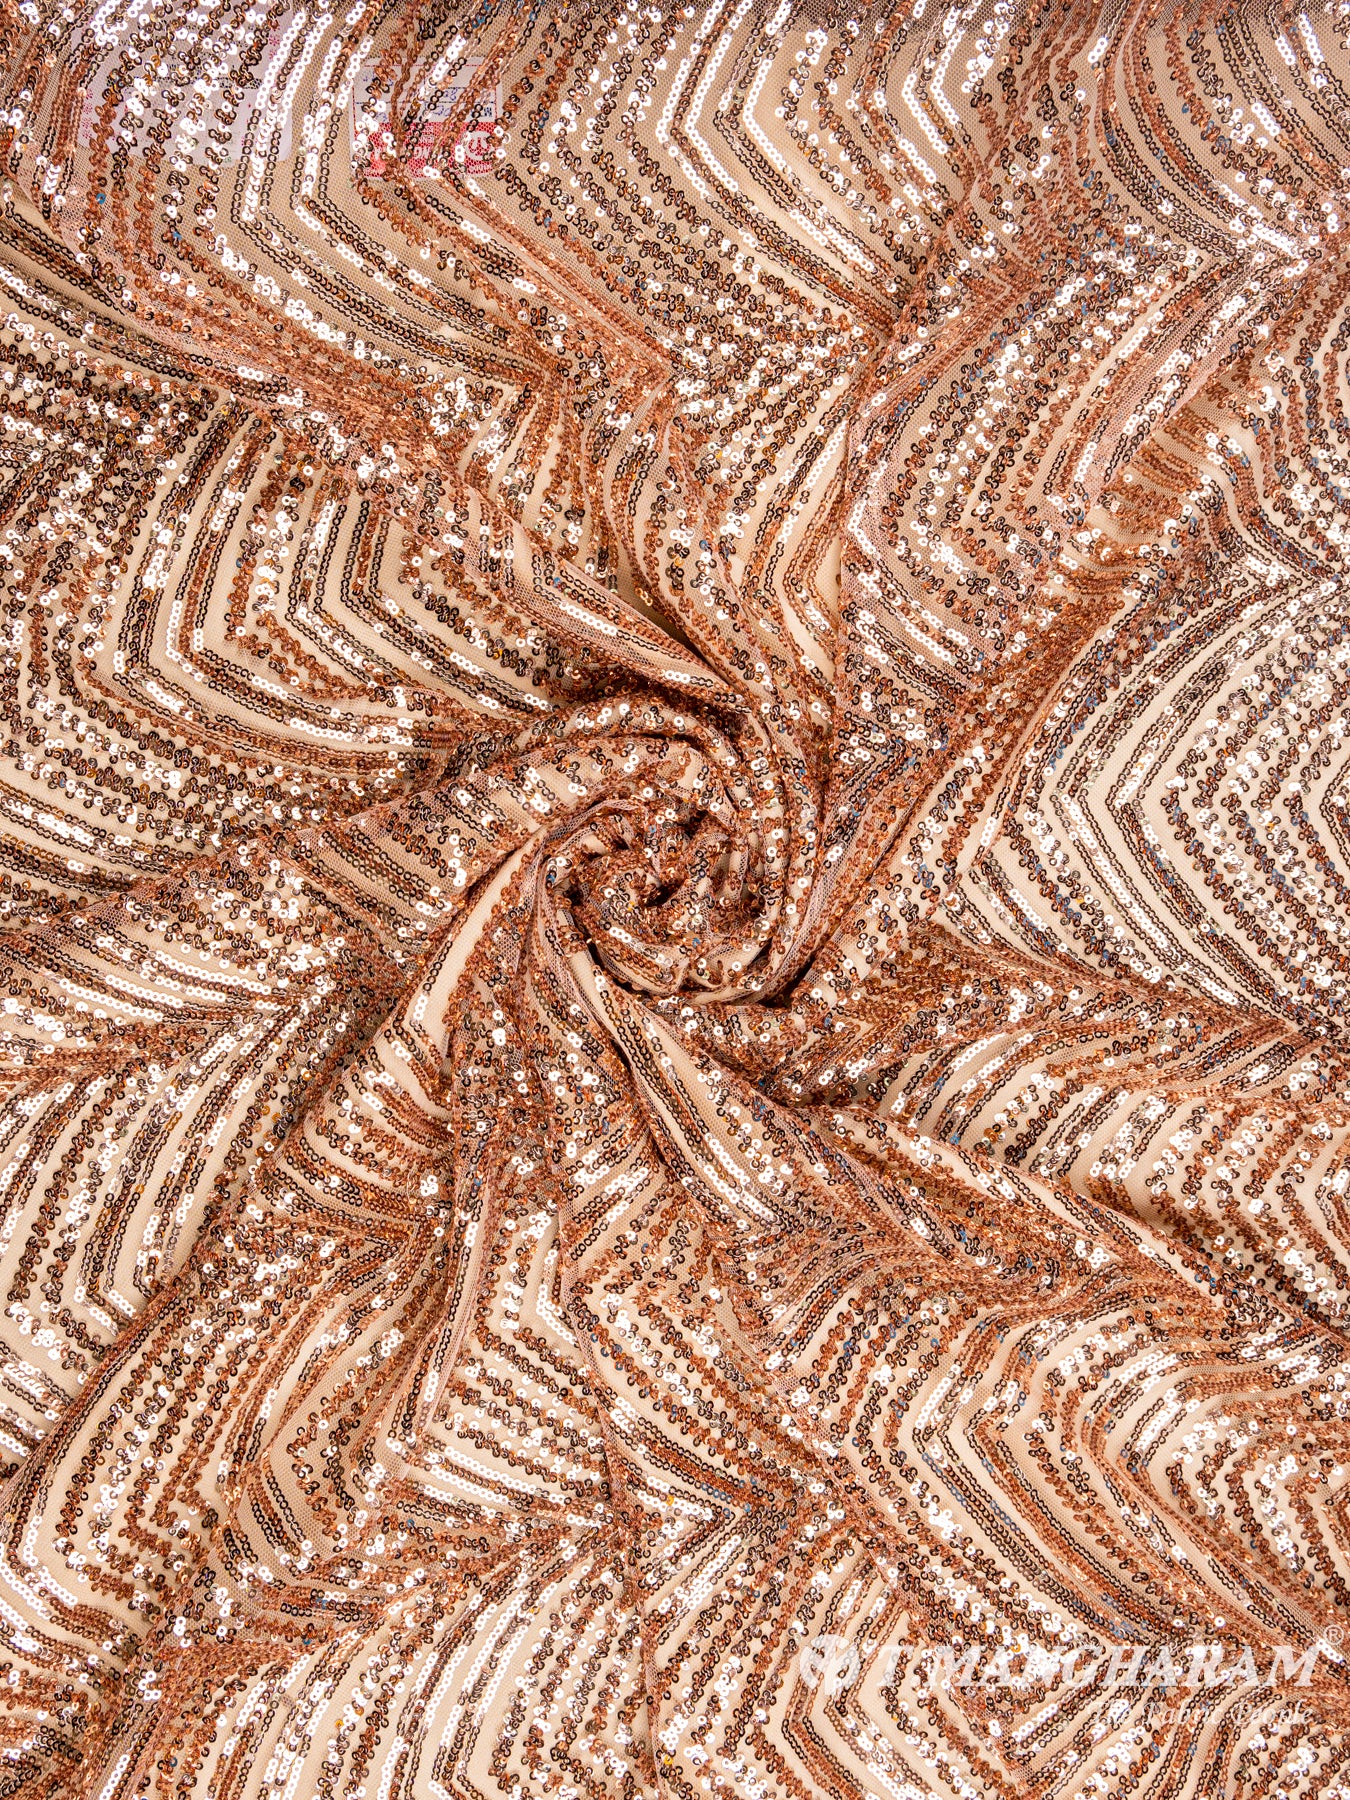 Rose Gold Sequin Net Fabric - EA1668 view-1